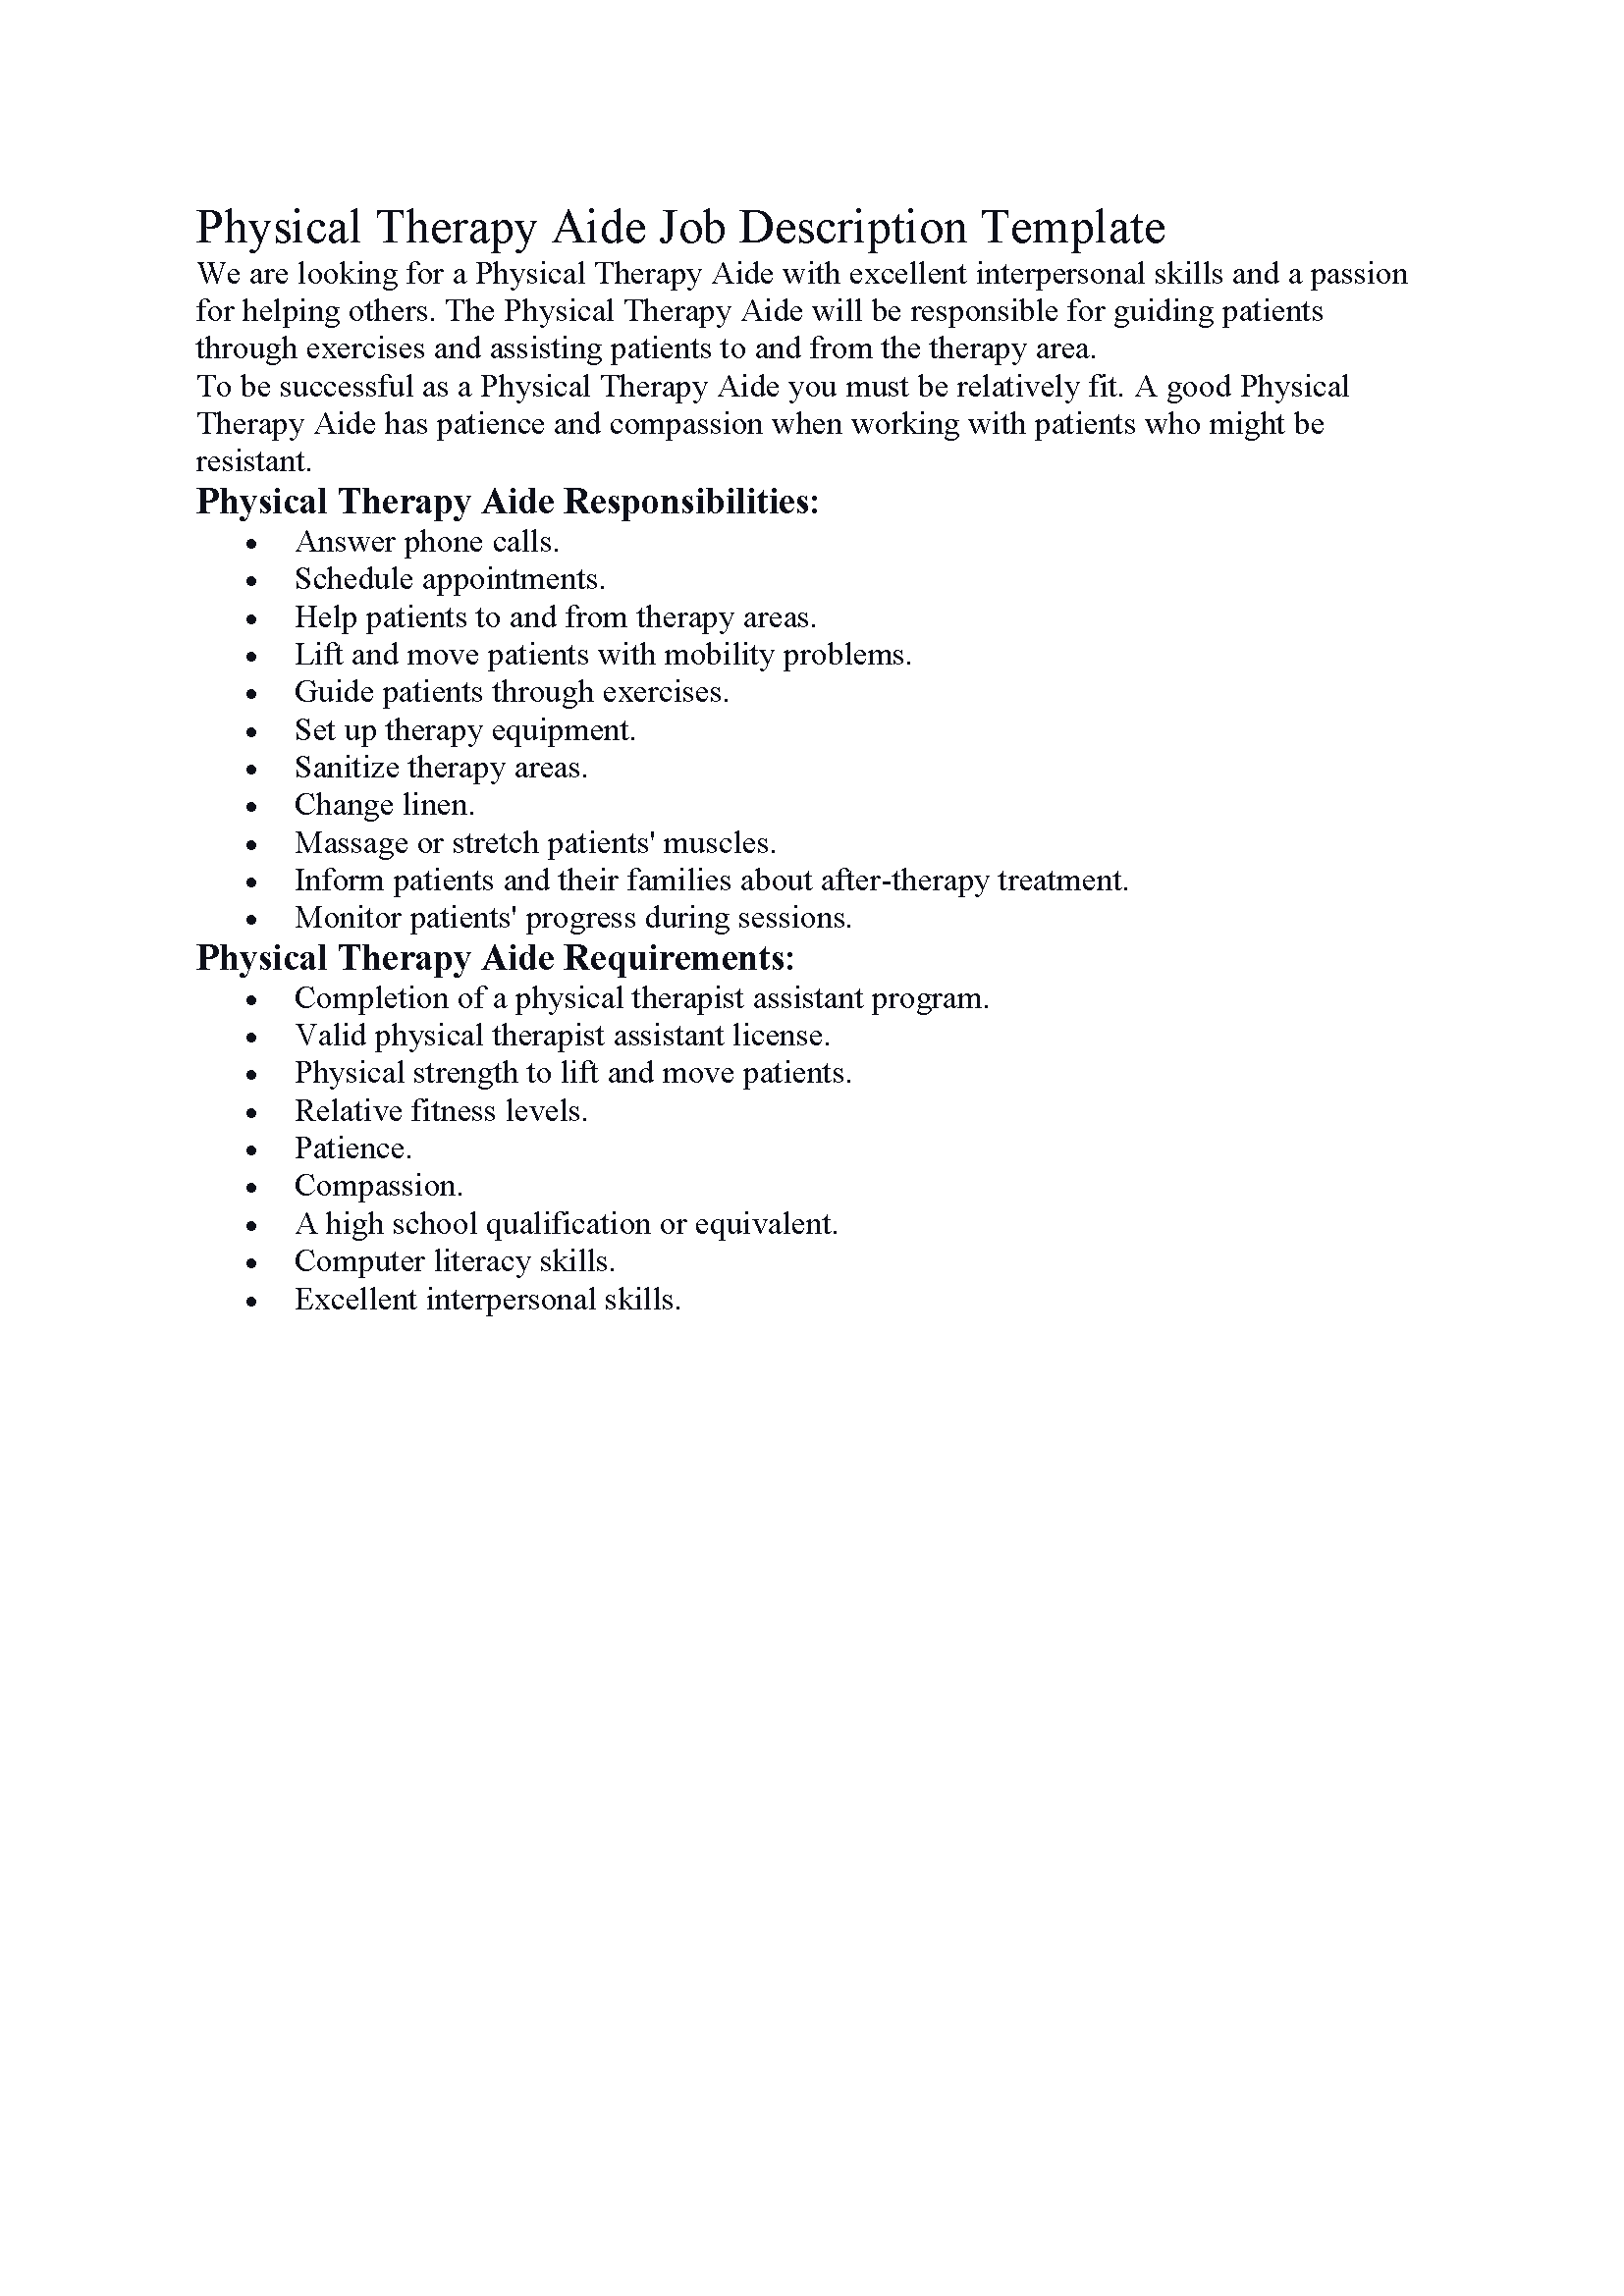 Physical Therapy Aide Job Description Template